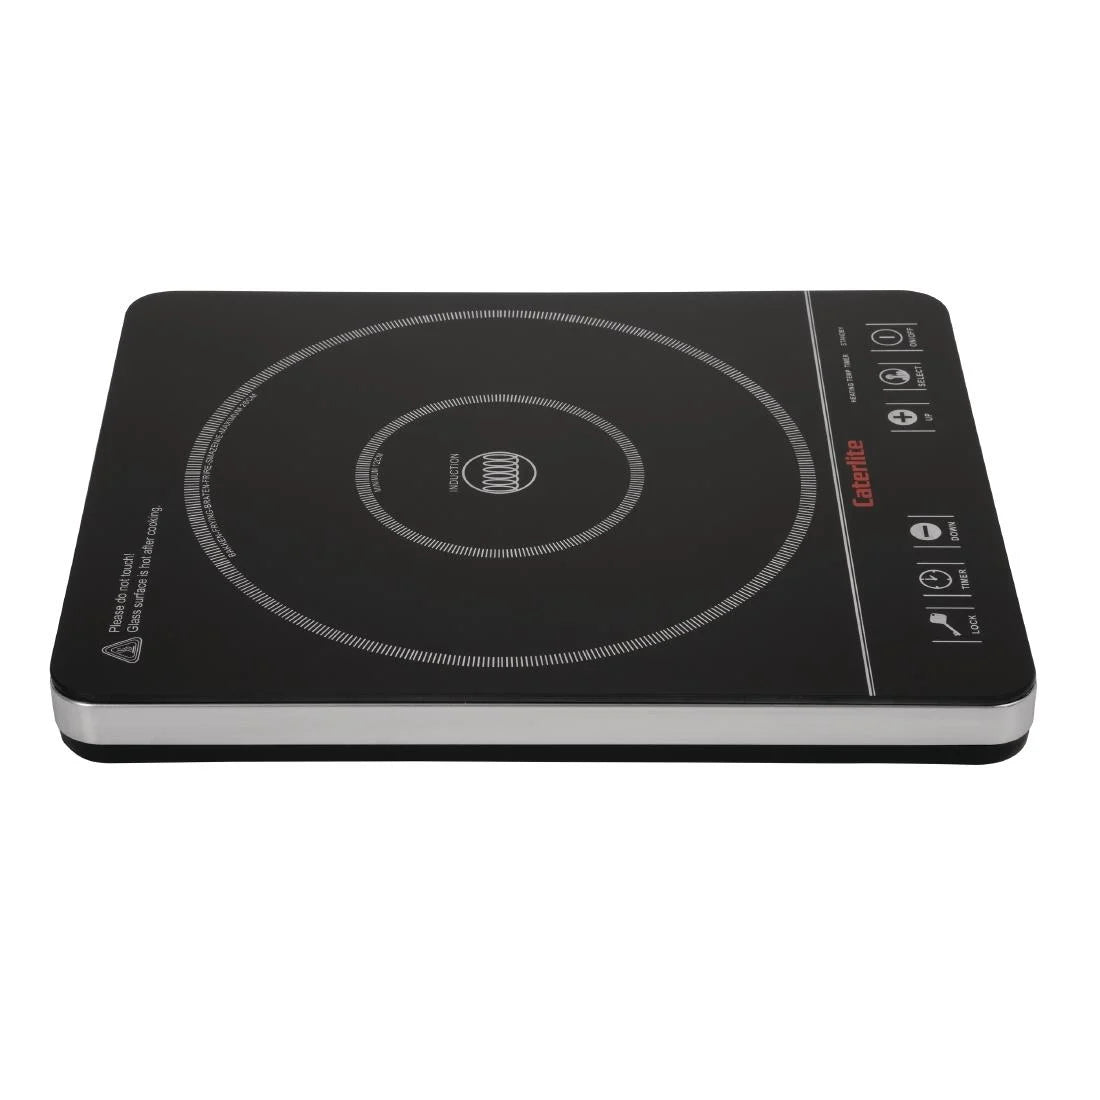 Caterlite Induction Hob 2000W.Product Ref:00709.Model:CM352. 🚚 3-5 Days Delivery